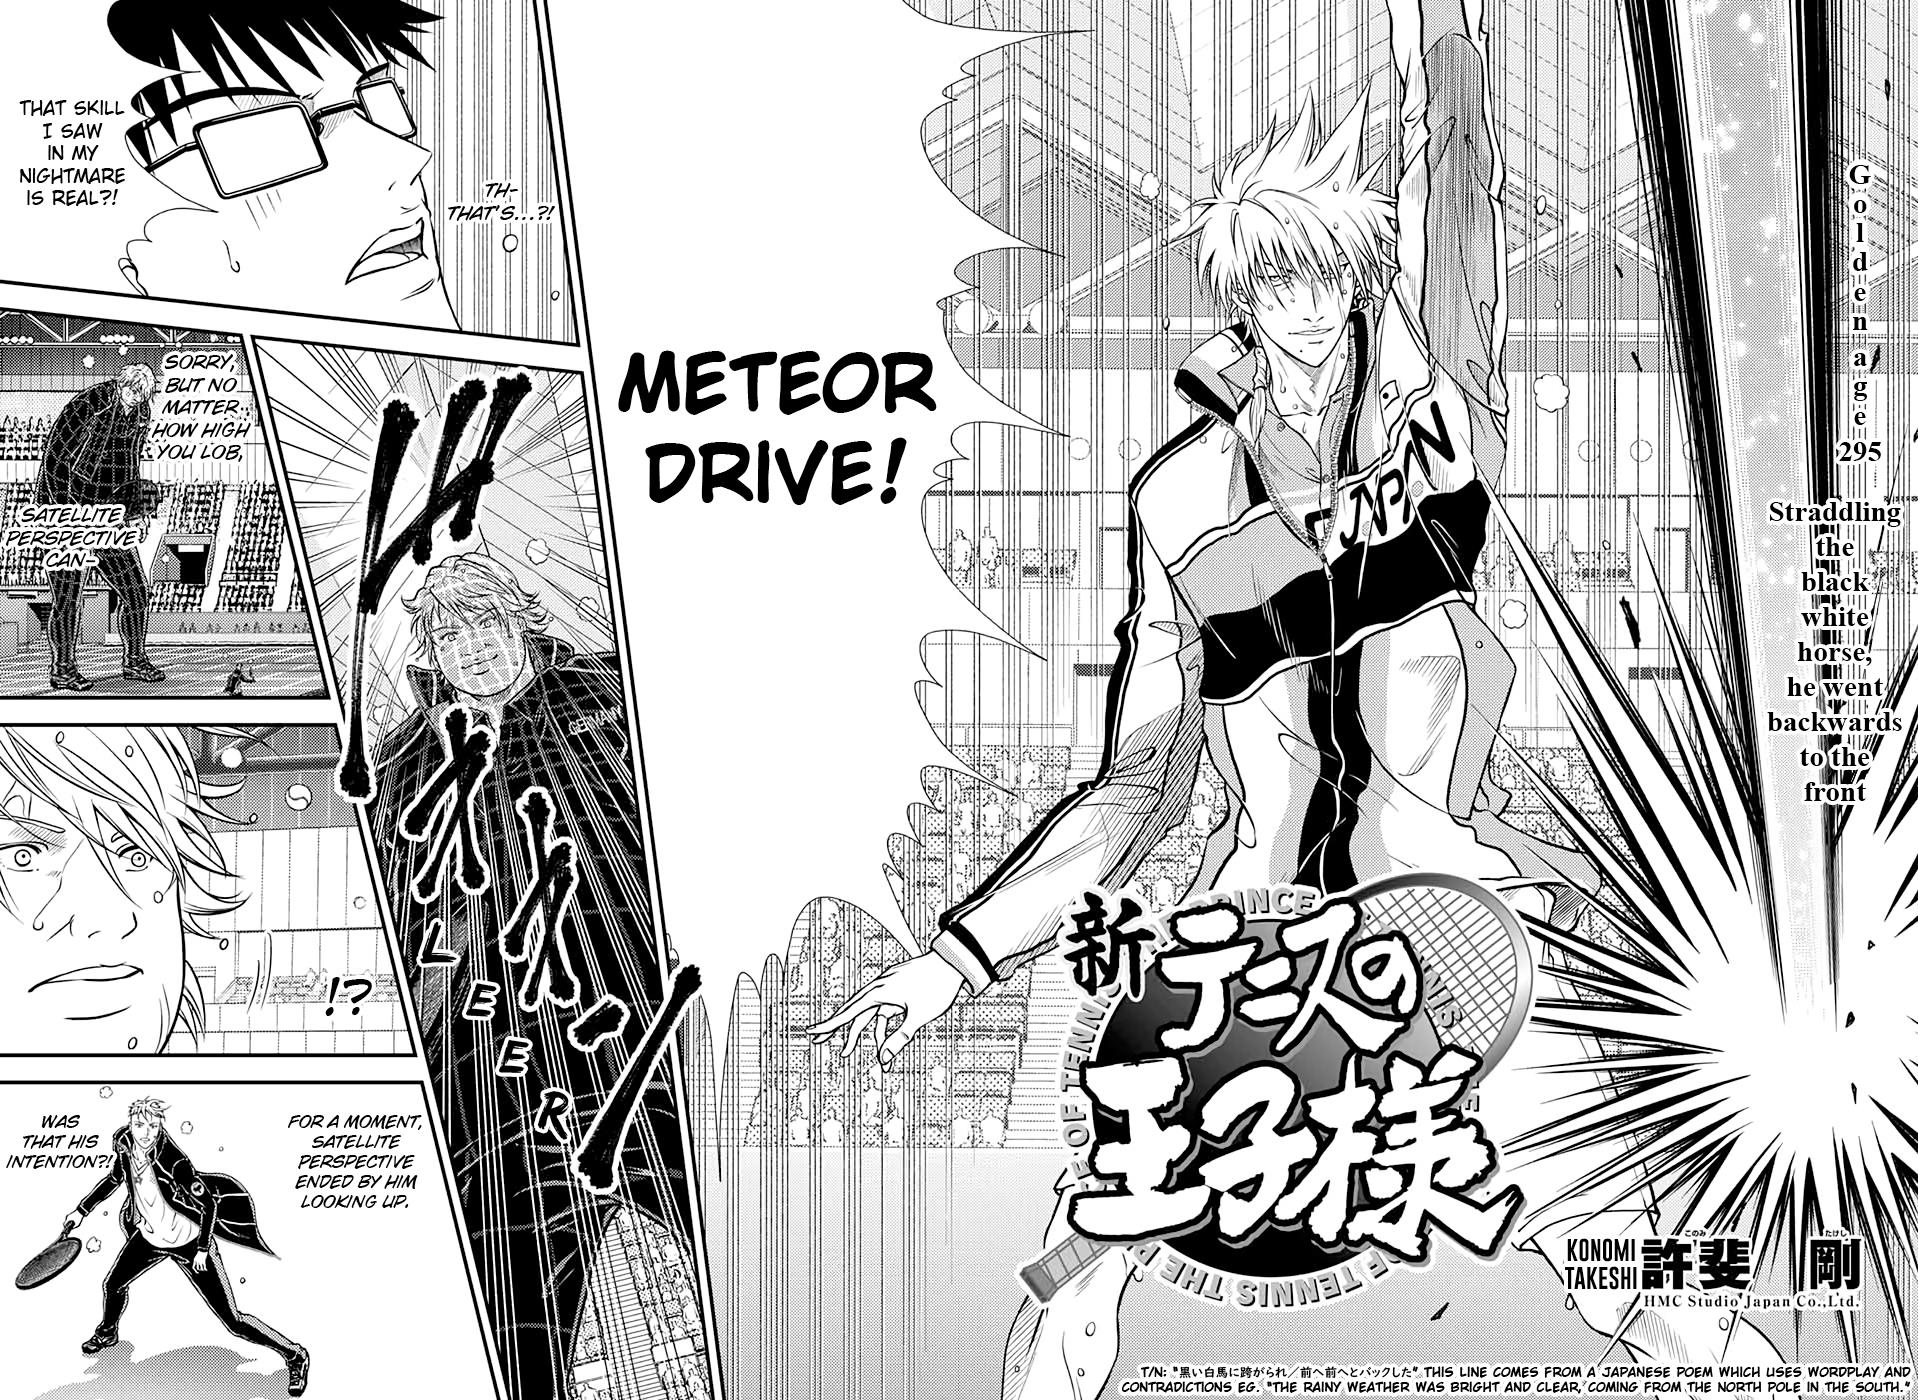 New Prince Of Tennis Vol.30 Chapter 295: Straddling The Black White Horse, He Went Backwards To The Front - Picture 2